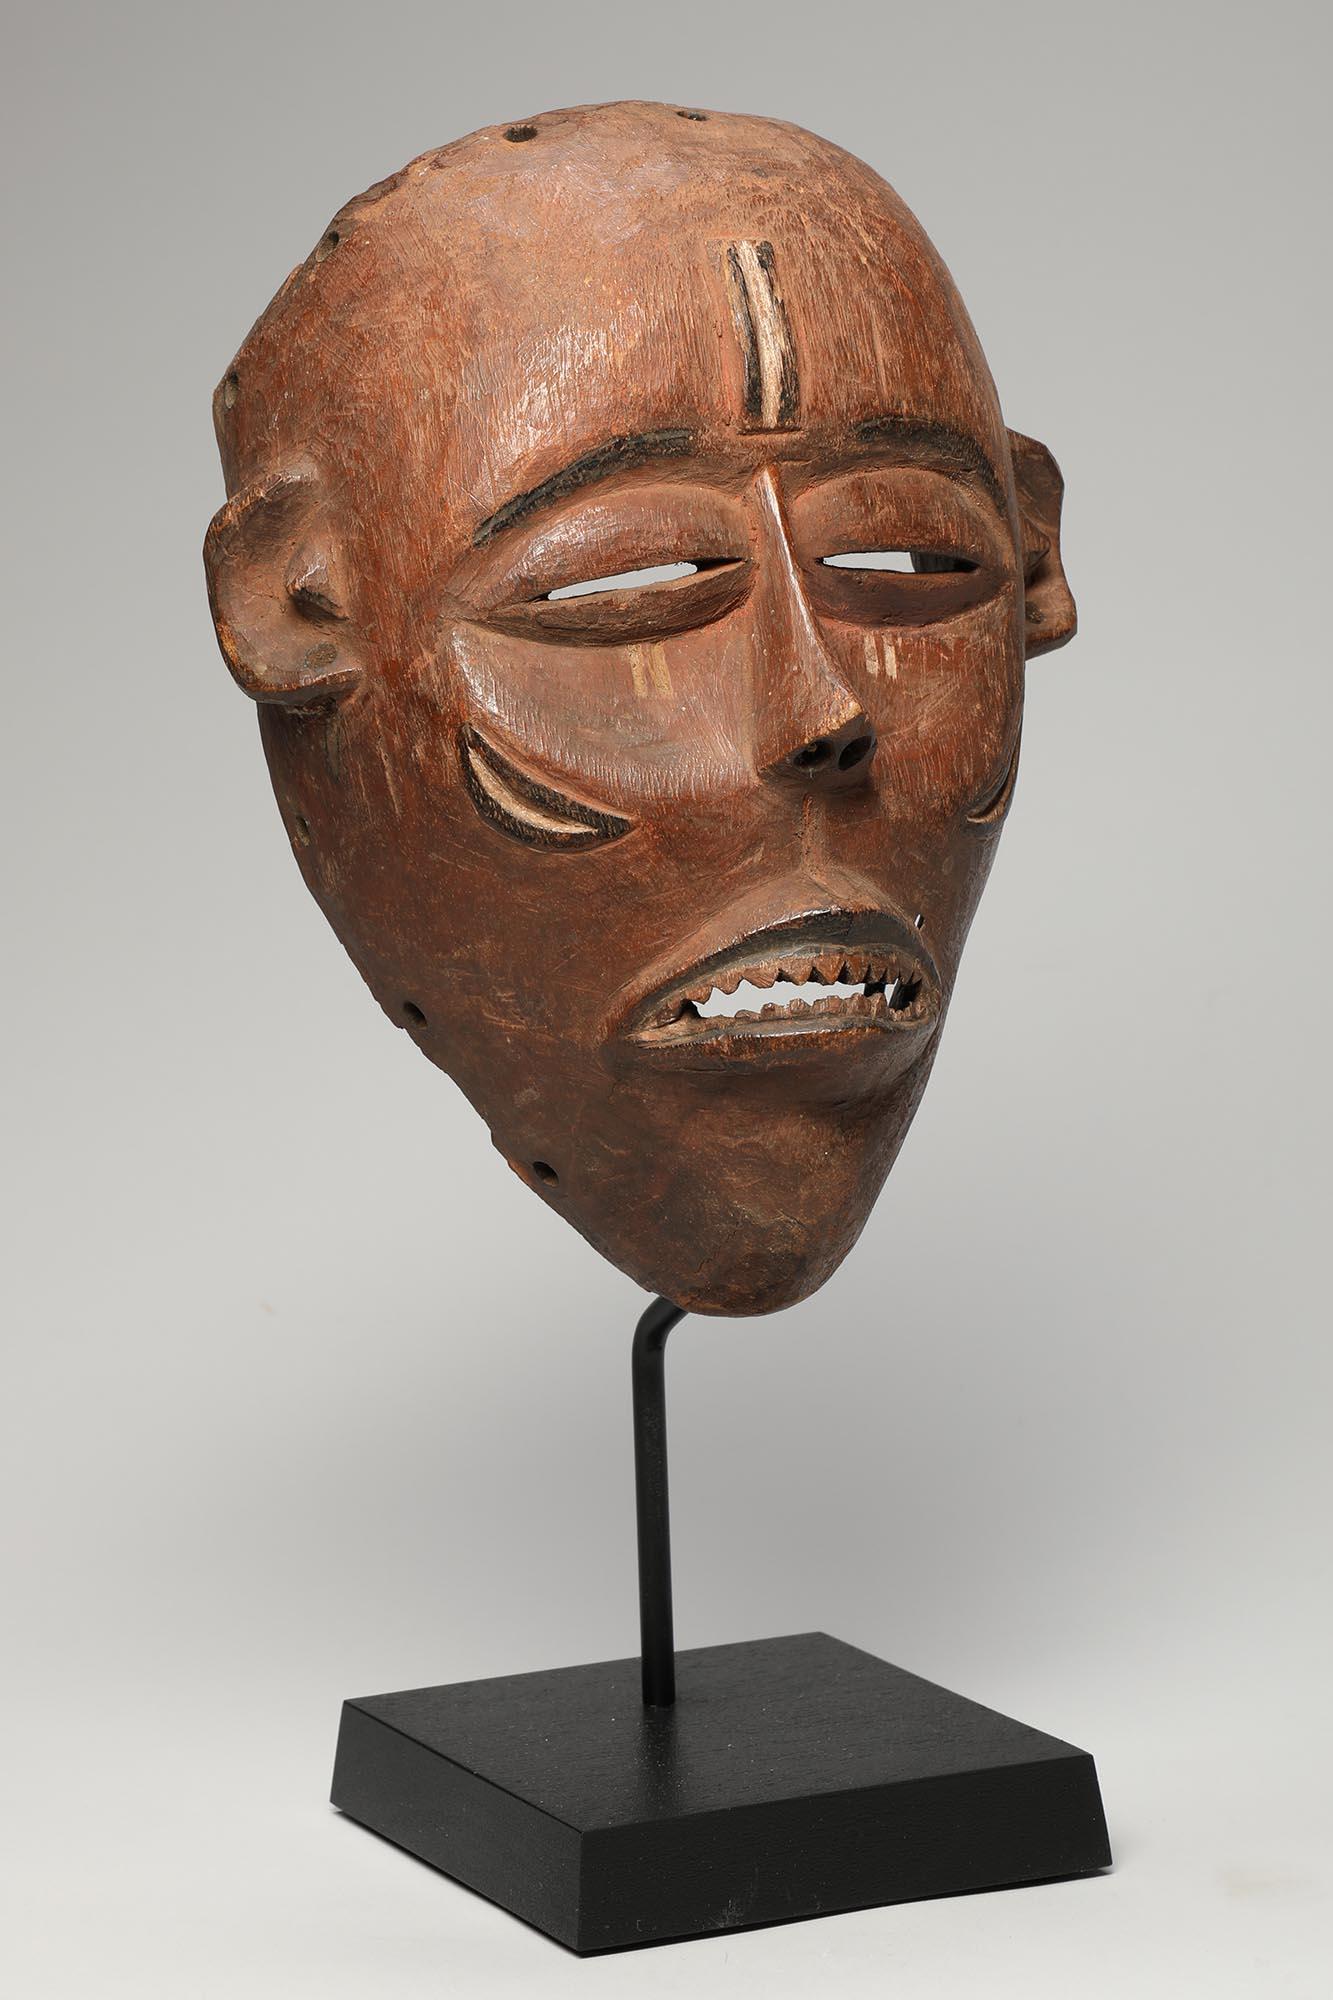 Early Hardwood Pende Dance Mask Early 20th Century DR Congo African Tribal Art In Good Condition For Sale In Santa Fe, NM